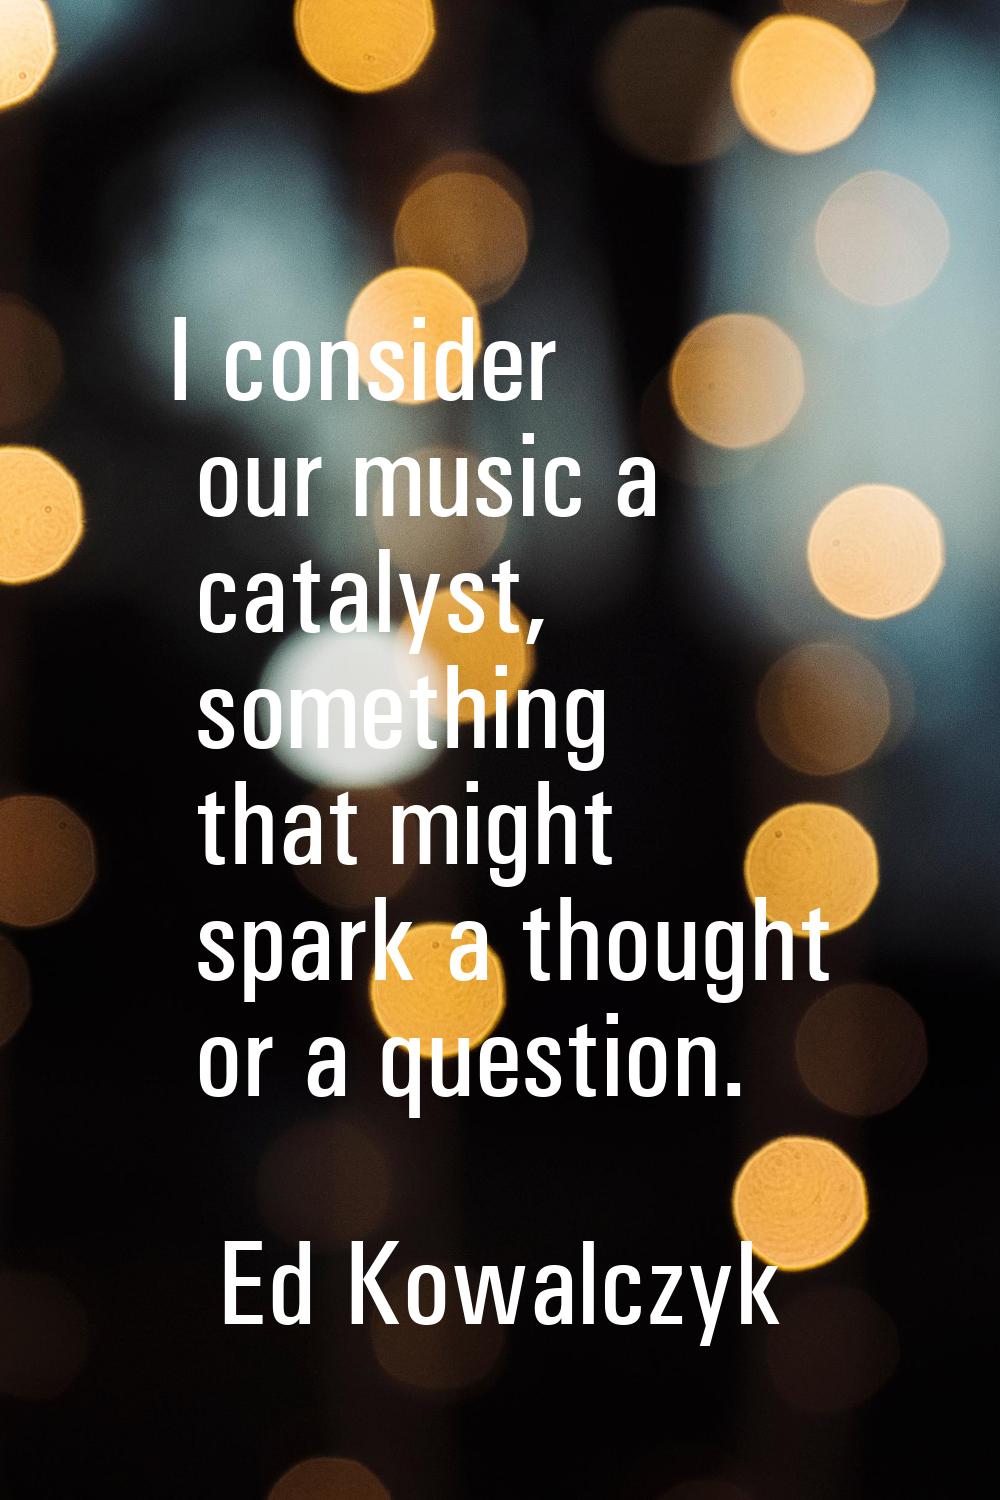 I consider our music a catalyst, something that might spark a thought or a question.